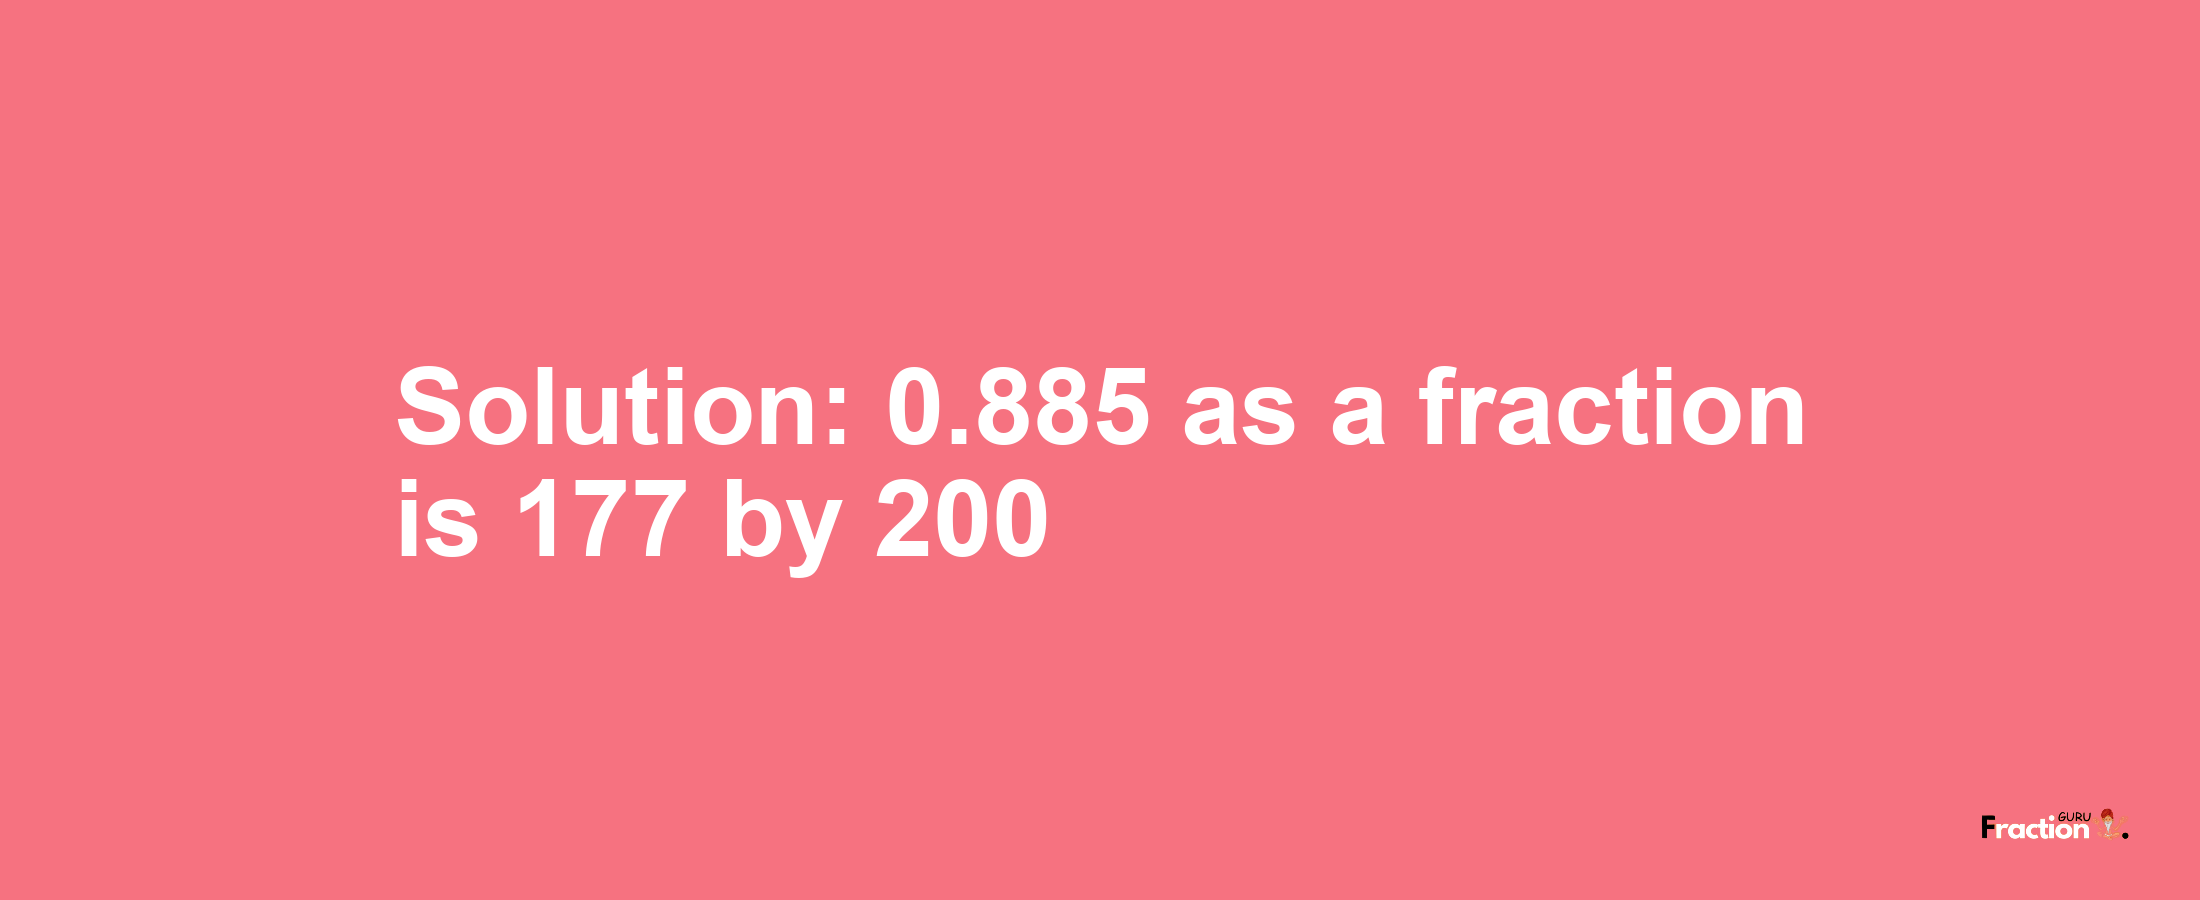 Solution:0.885 as a fraction is 177/200